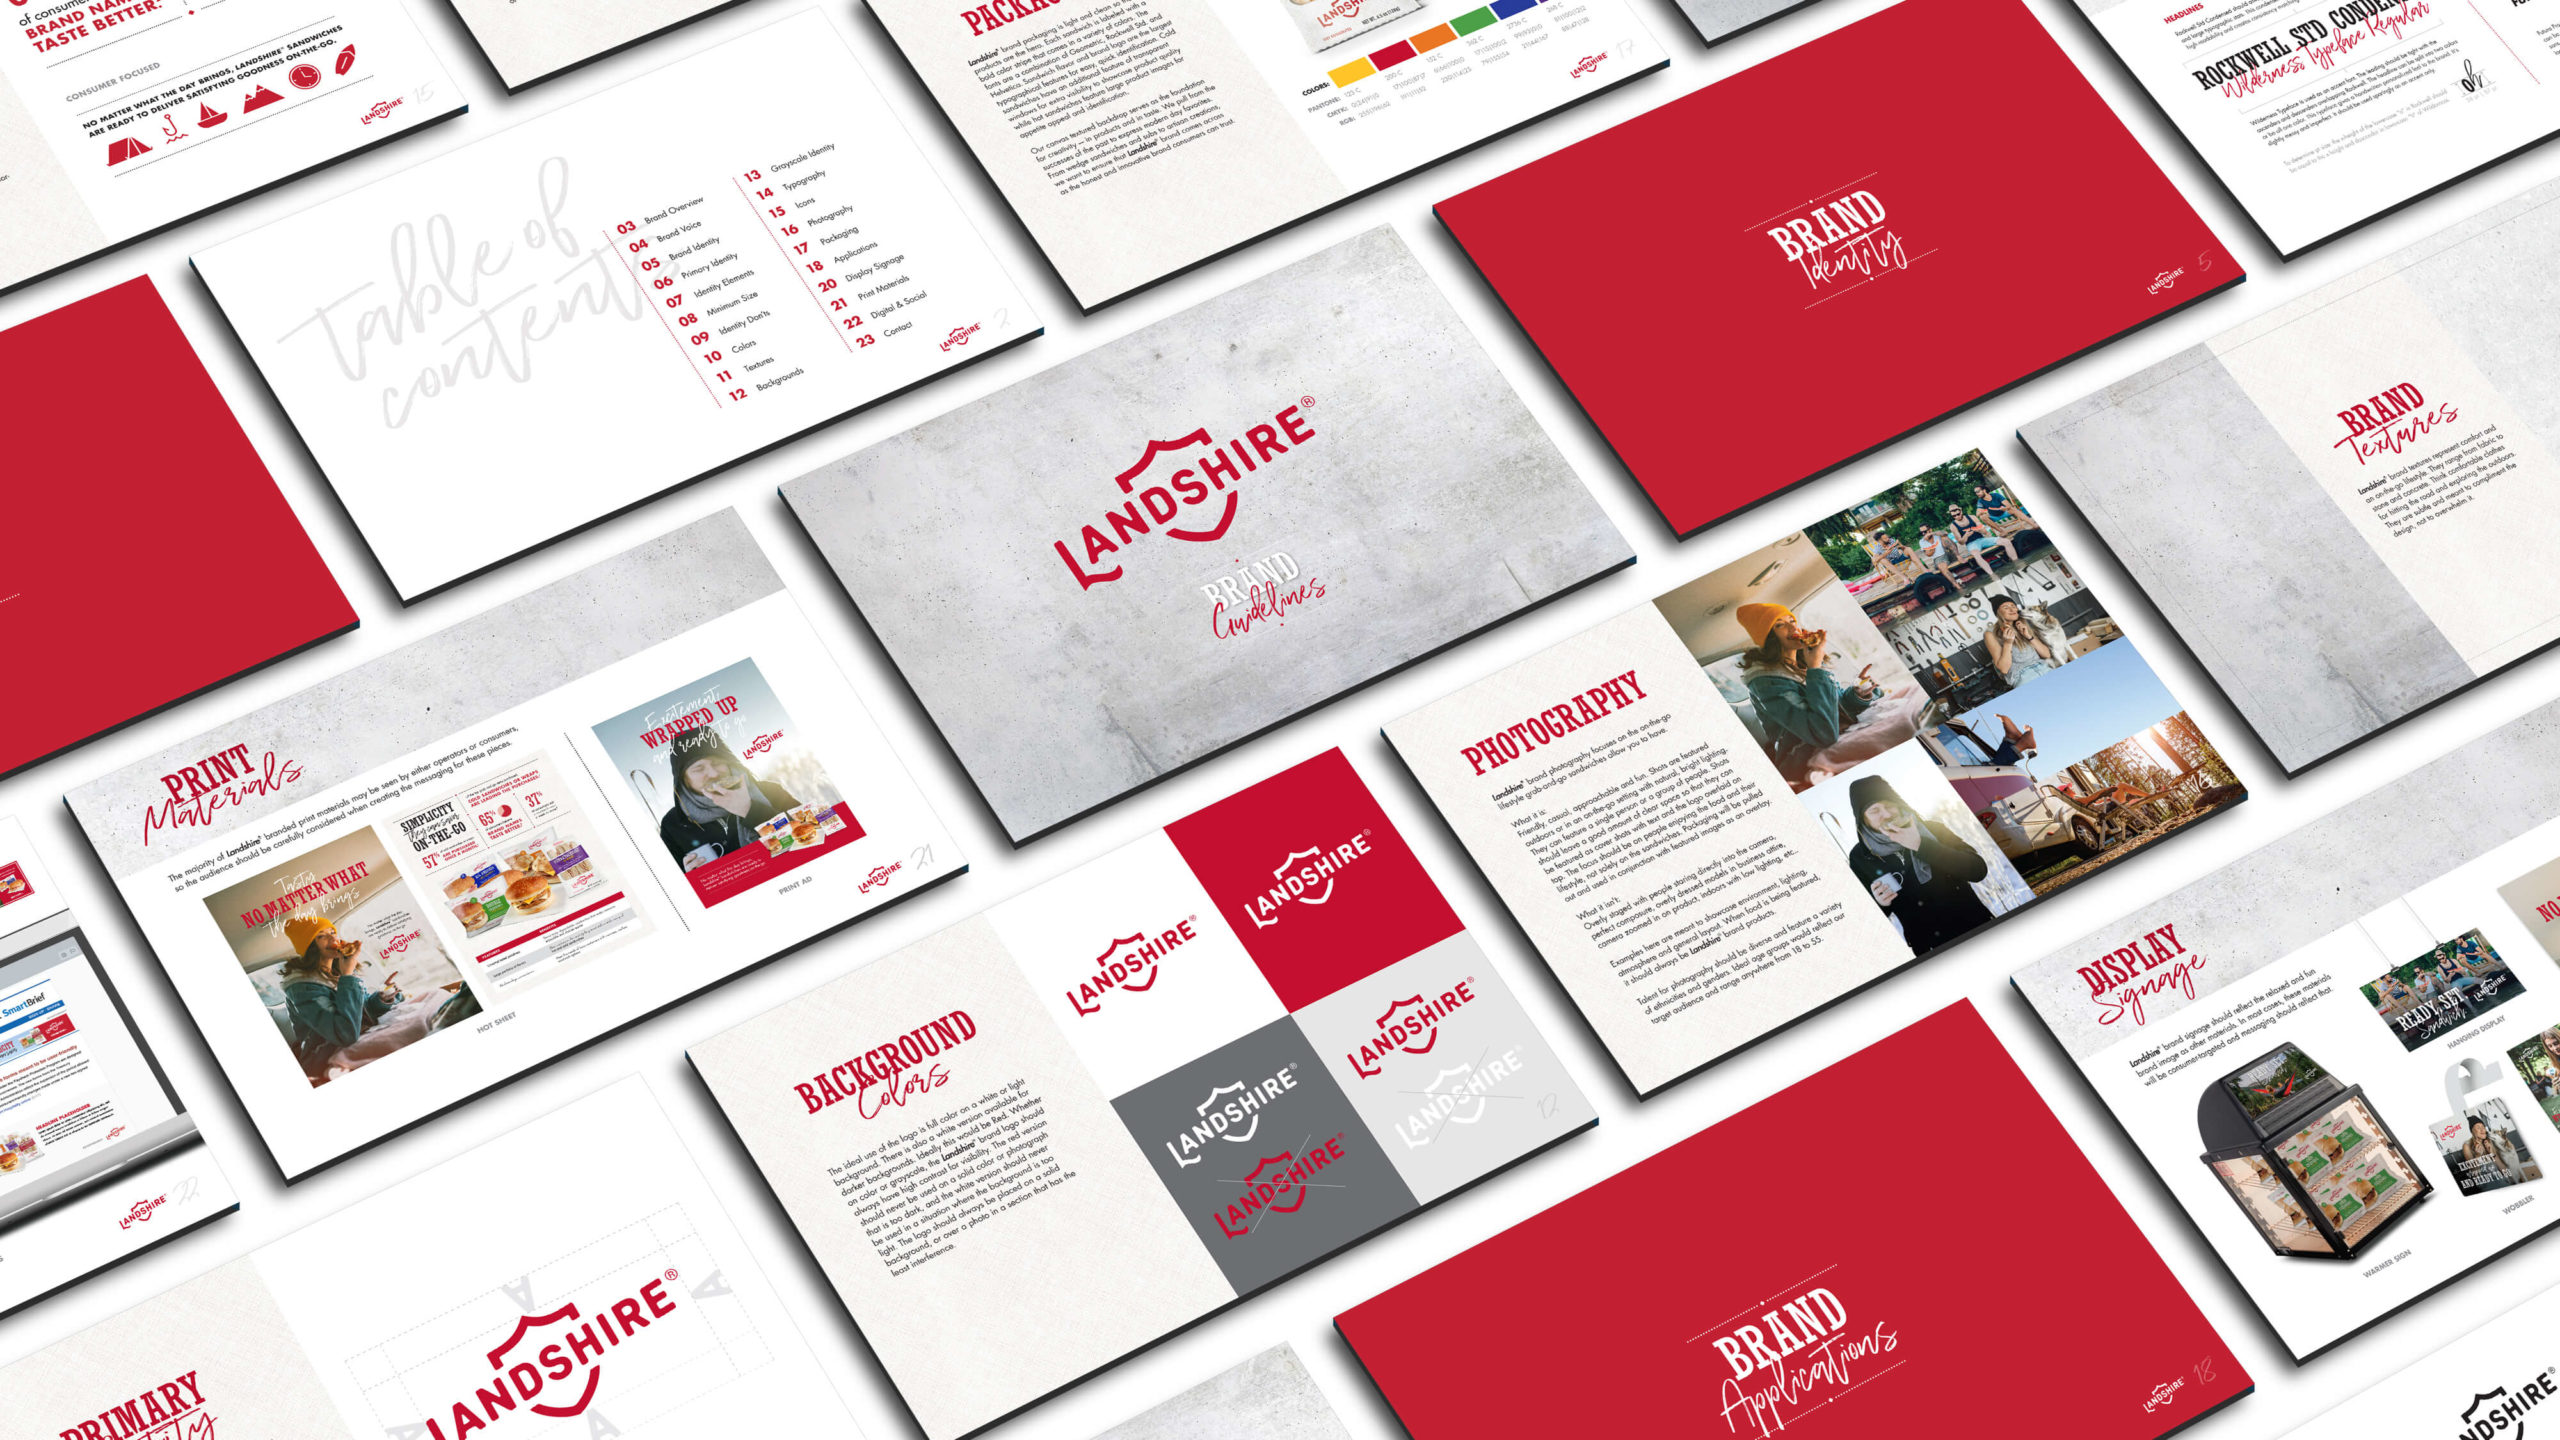 Landshire® Brand Guidelines Pages